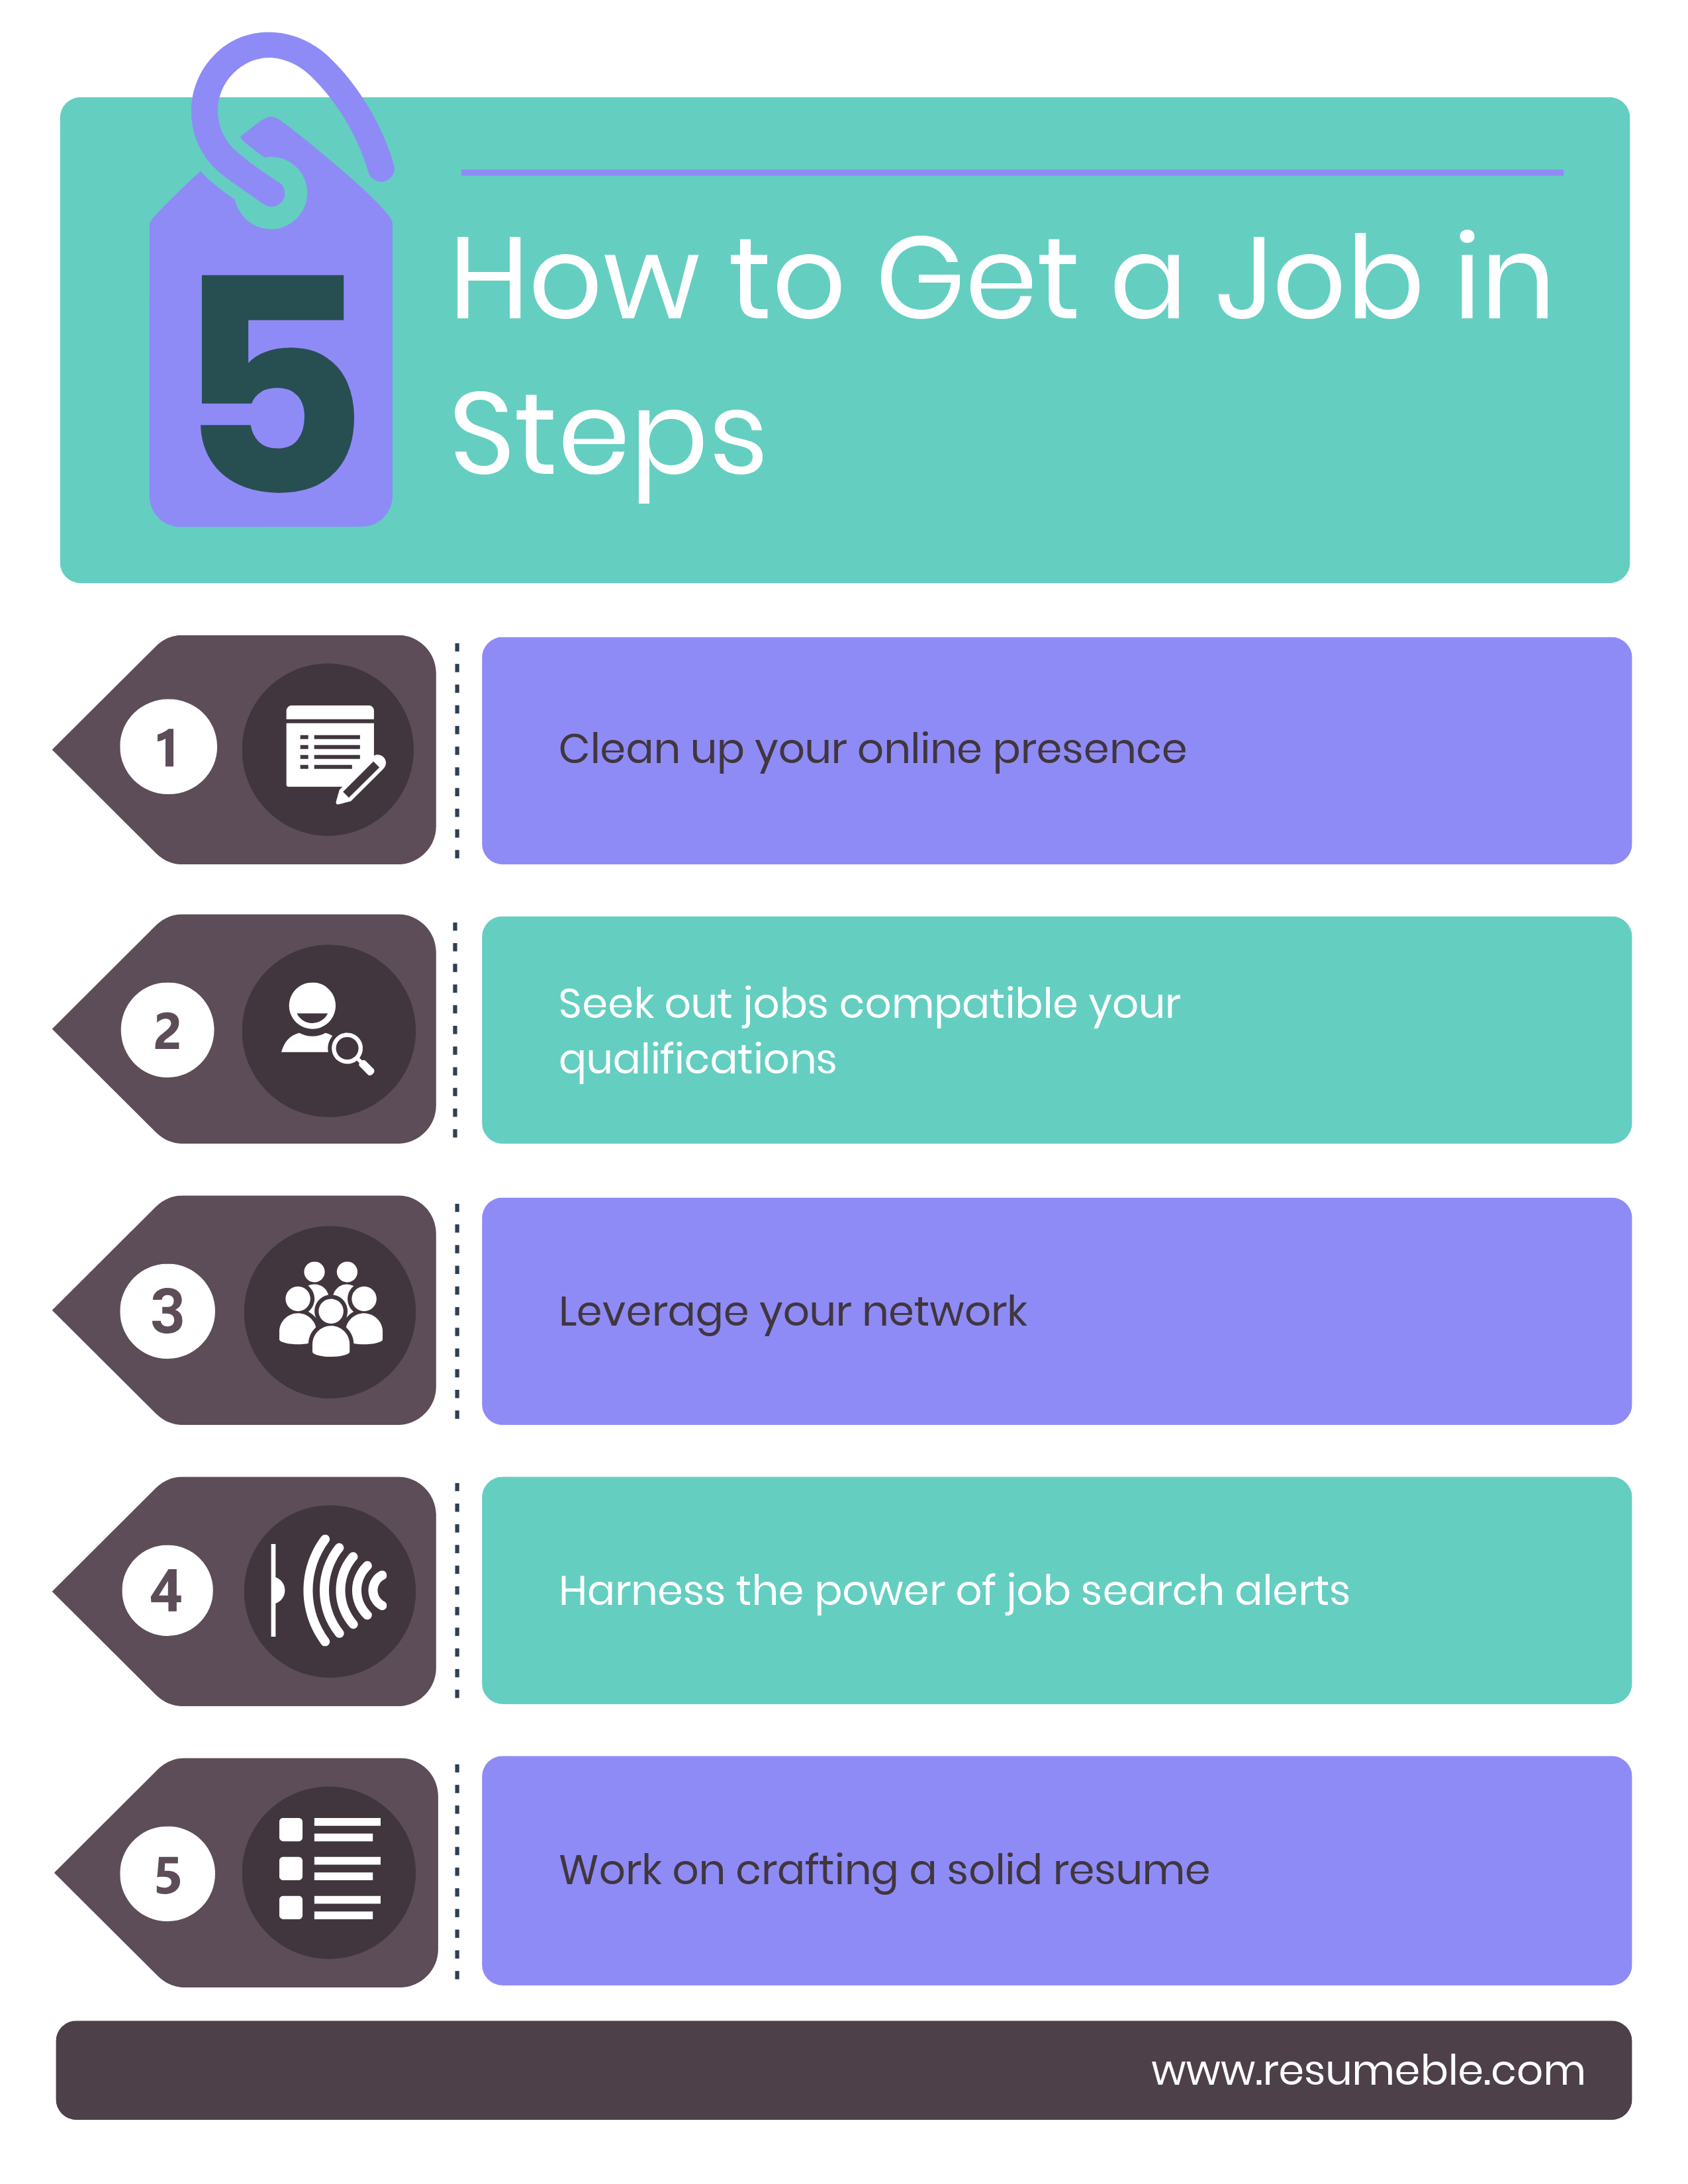 Want to Know How to Get a Job Fast? Resumeble Gives You 5 Easyto